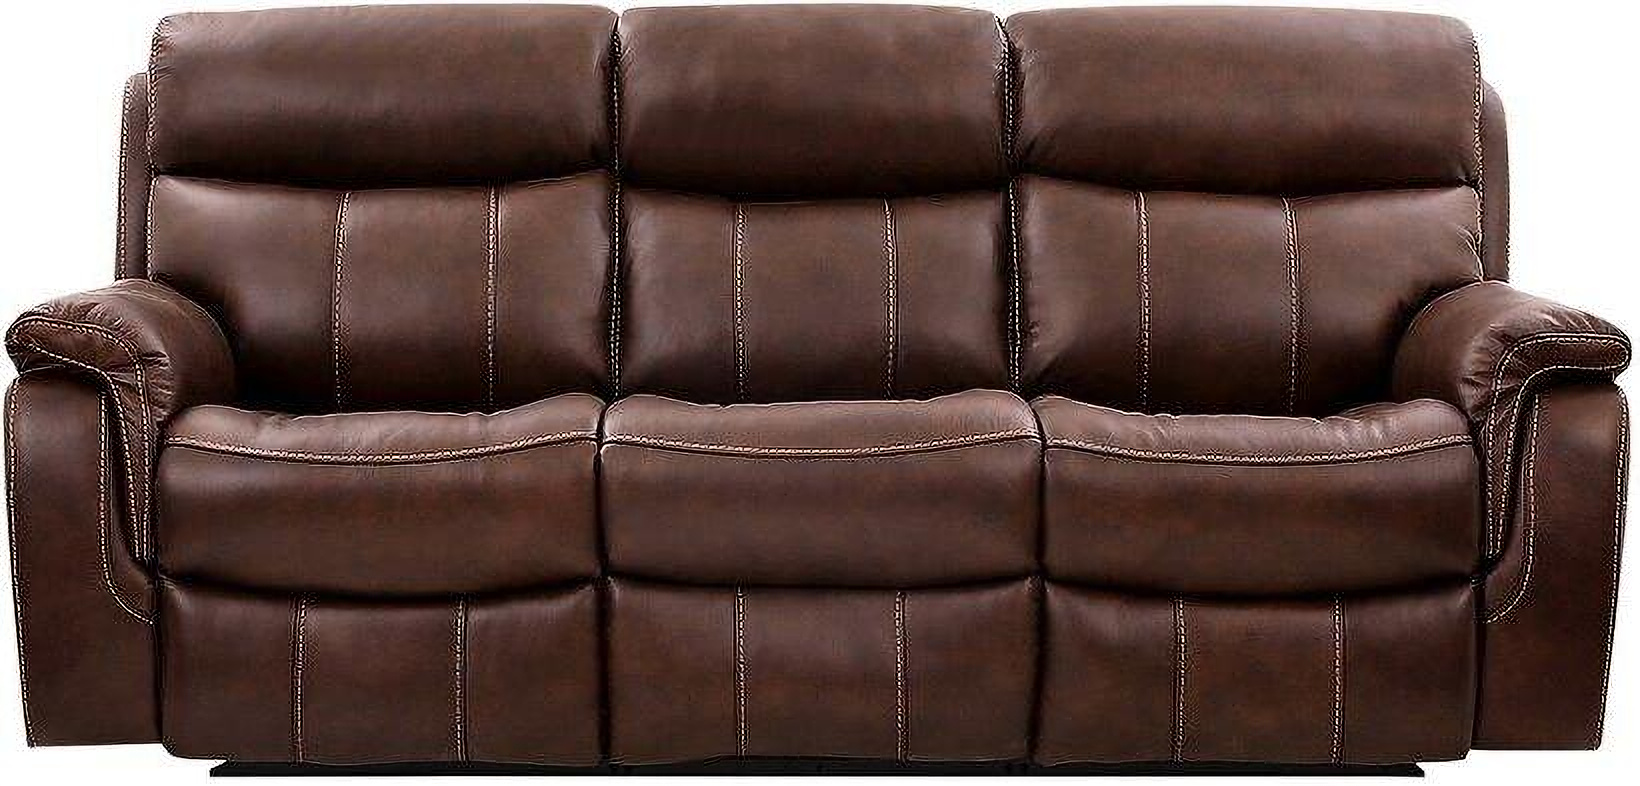 https://cdn.1stopbedrooms.com/media/i/raw/catalog/product/m/o/montague-dual-power-headrest-and-lumbar-support-reclining-sofa-in-genuine-brown-leather_qb13388657.jpg